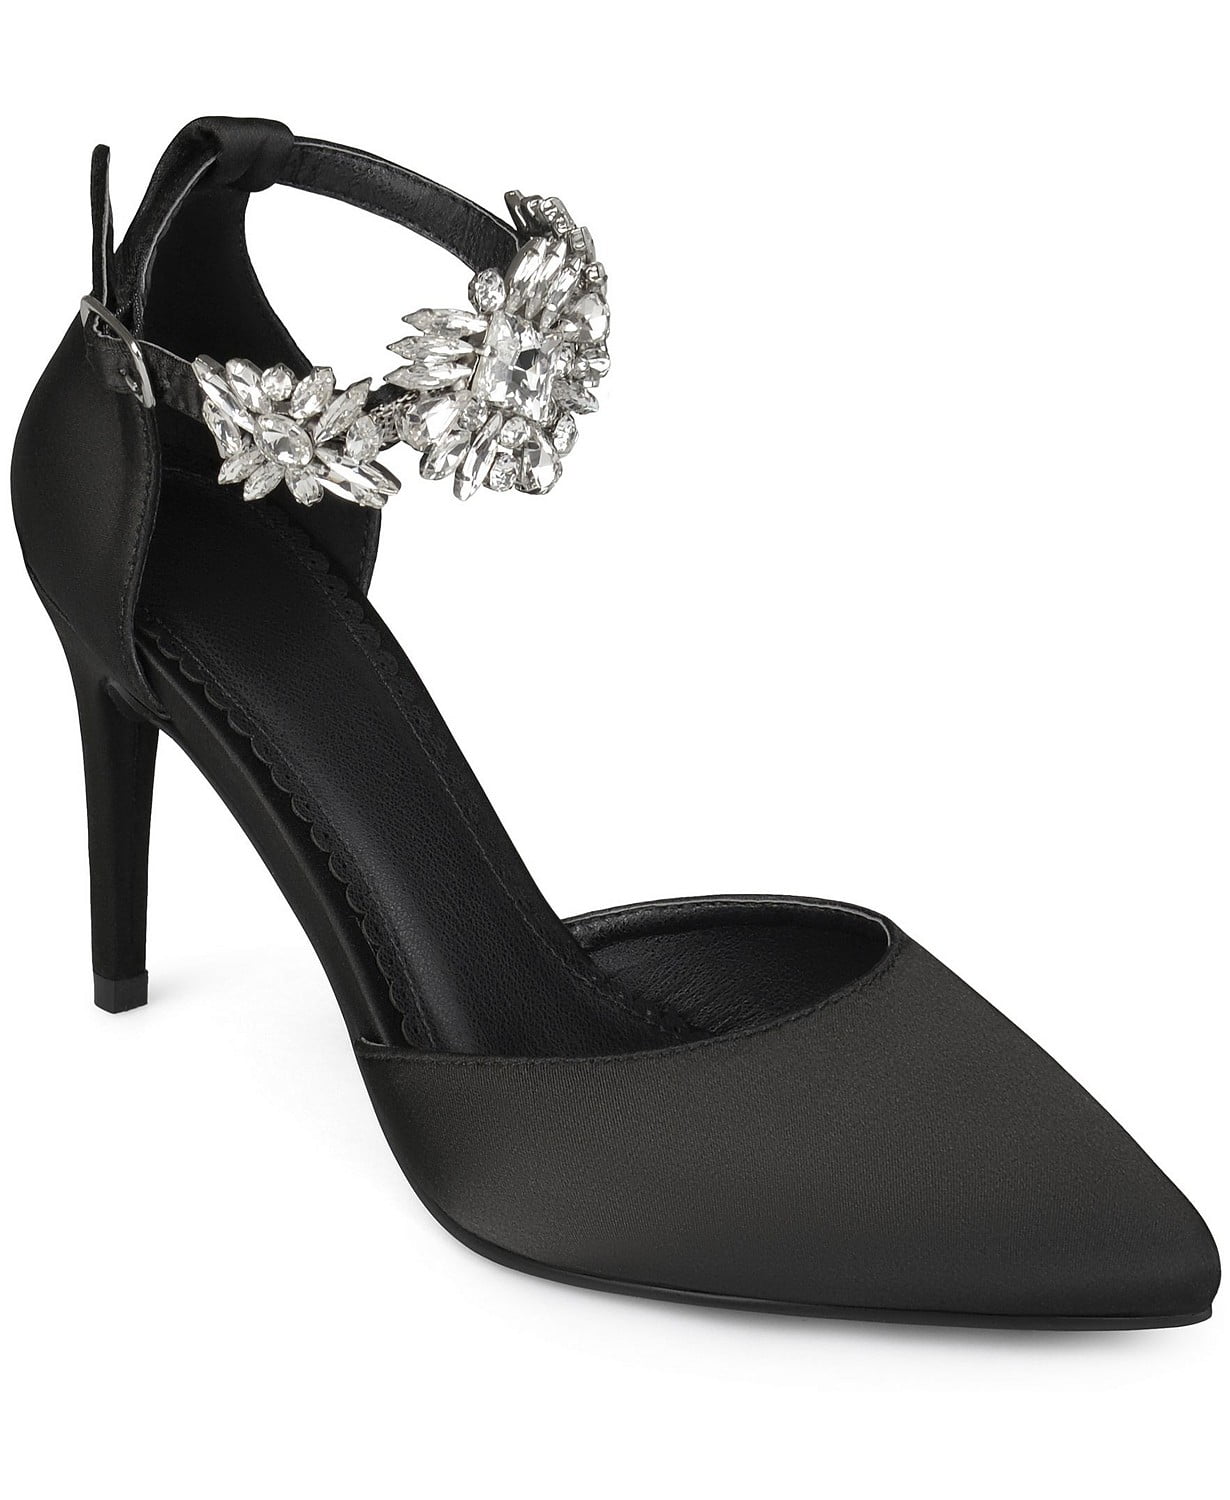 woocommerce-673321-2209615.cloudwaysapps.com-journee-collection-womens-black-satin-loxley-heel-pumps